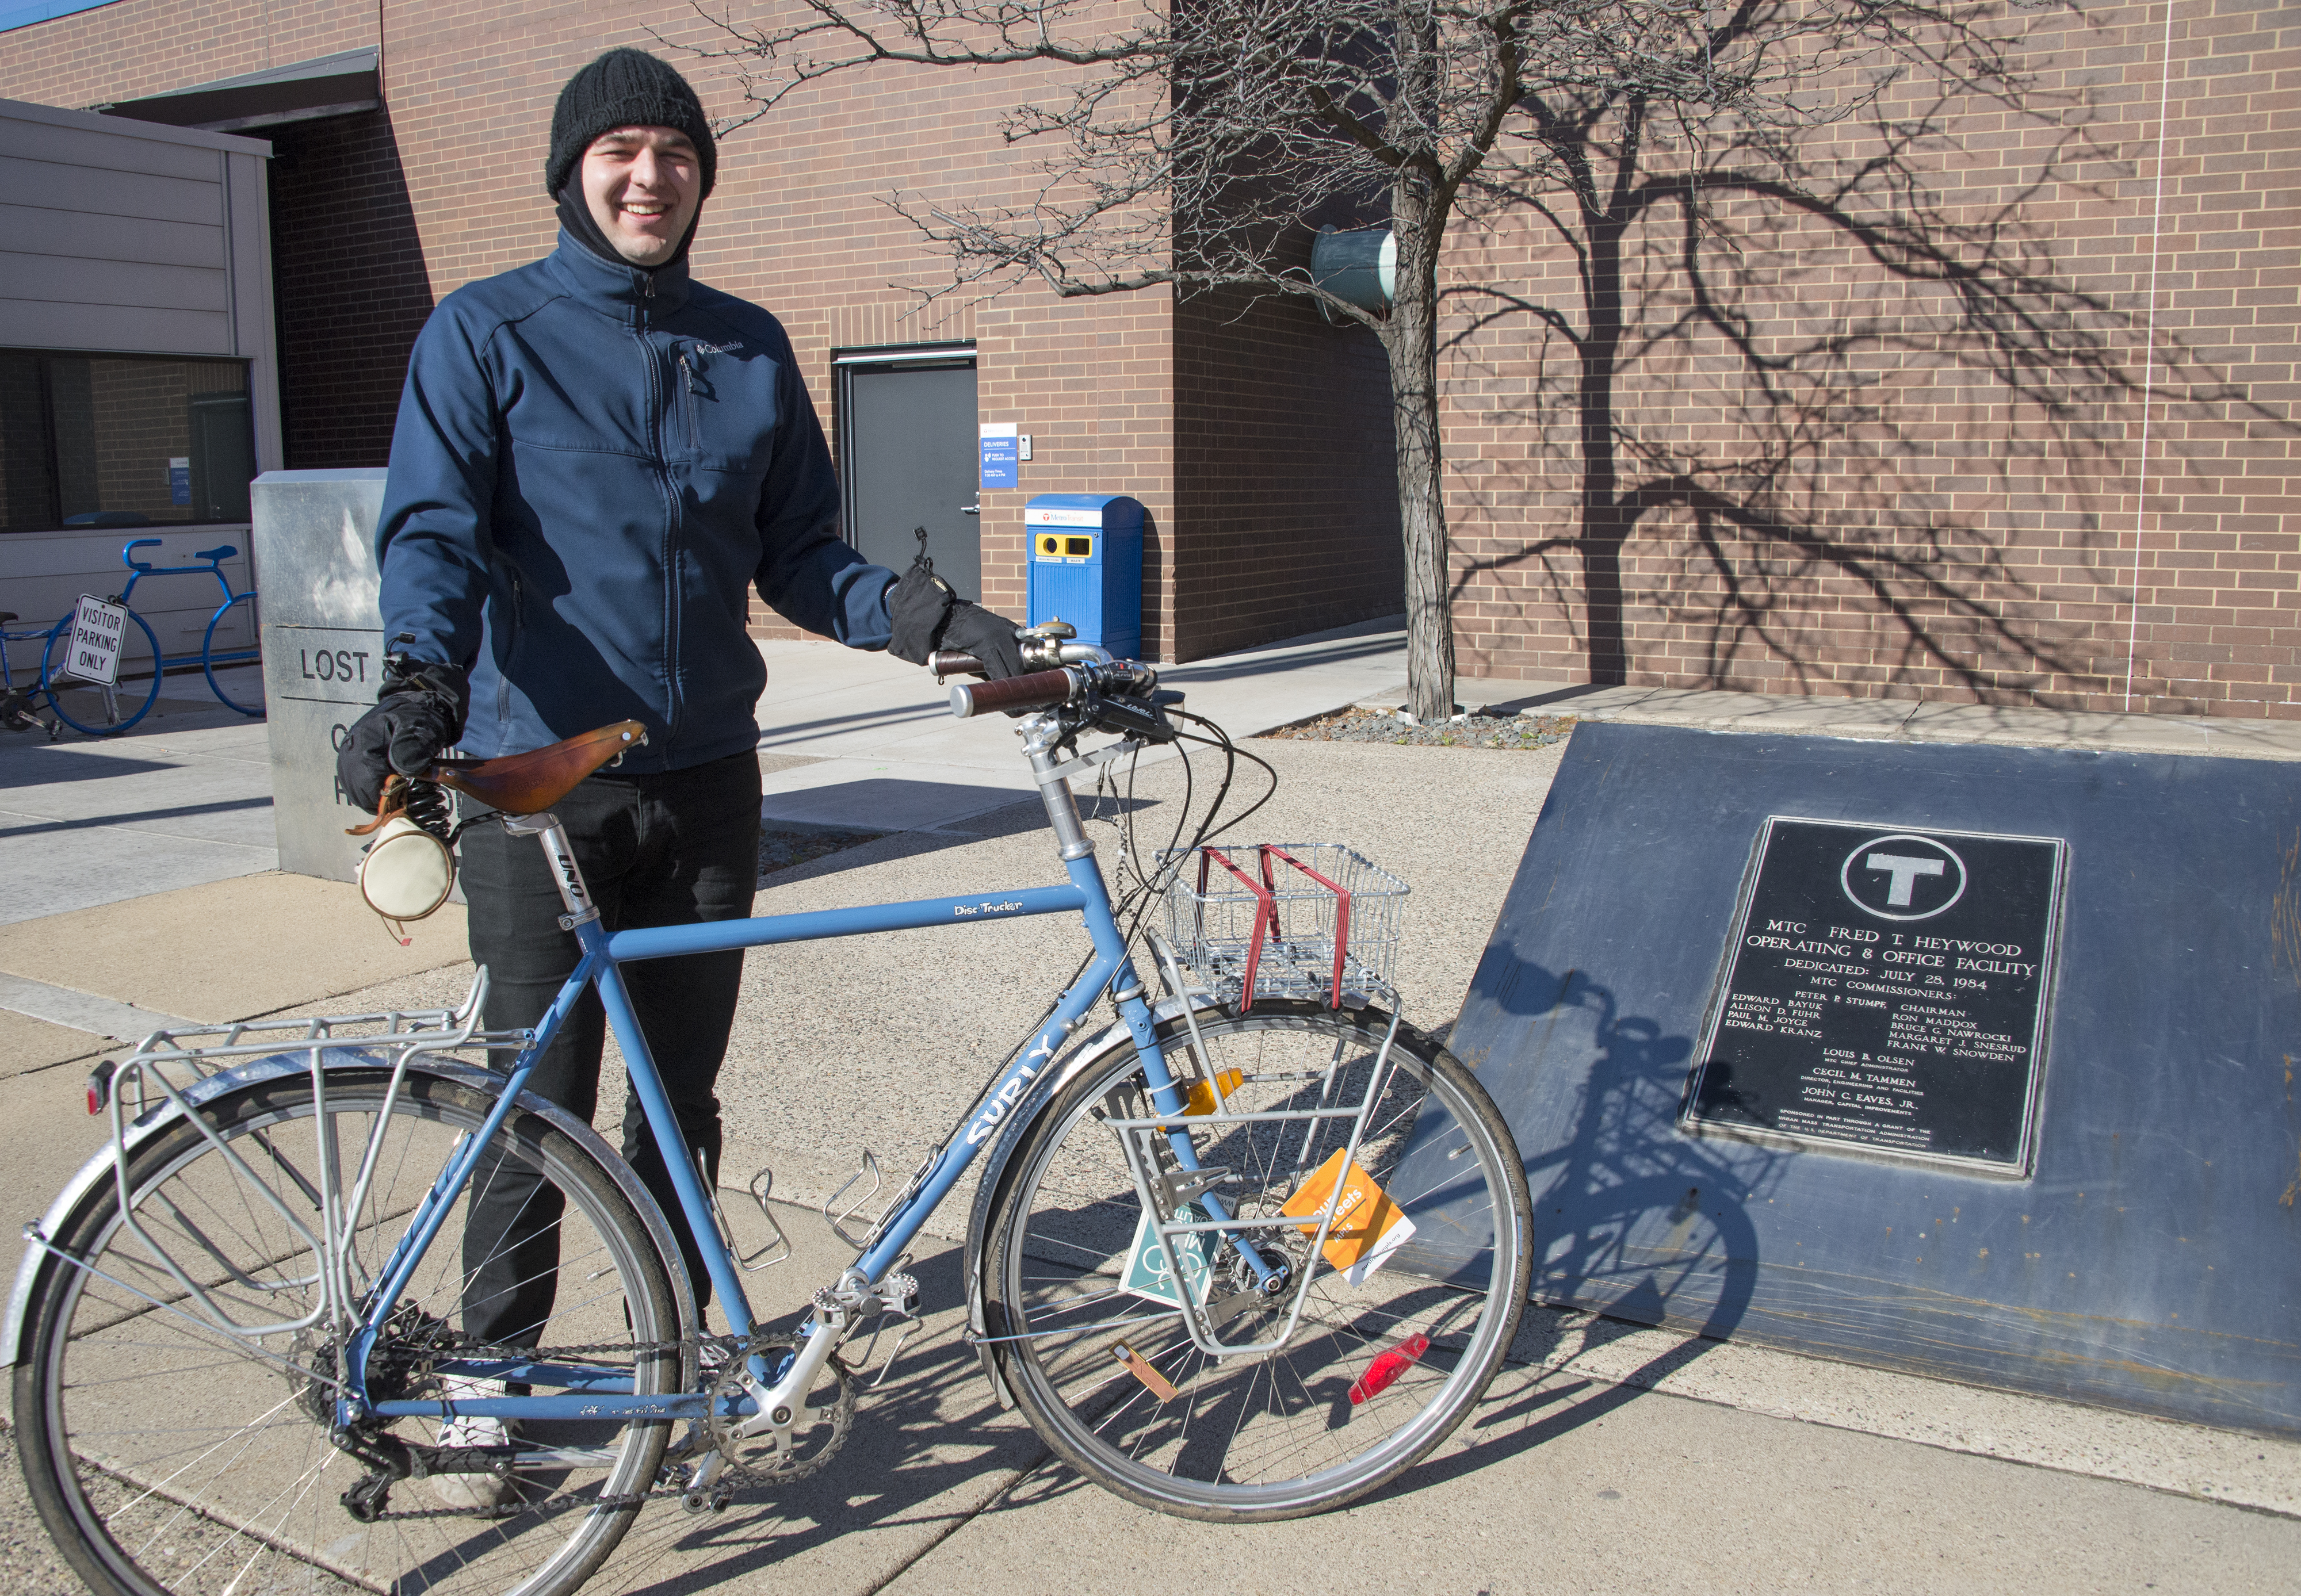 Jared Fette, Transit Information Center Representative, with his bike at the Heywood Office building in Minneapolis.